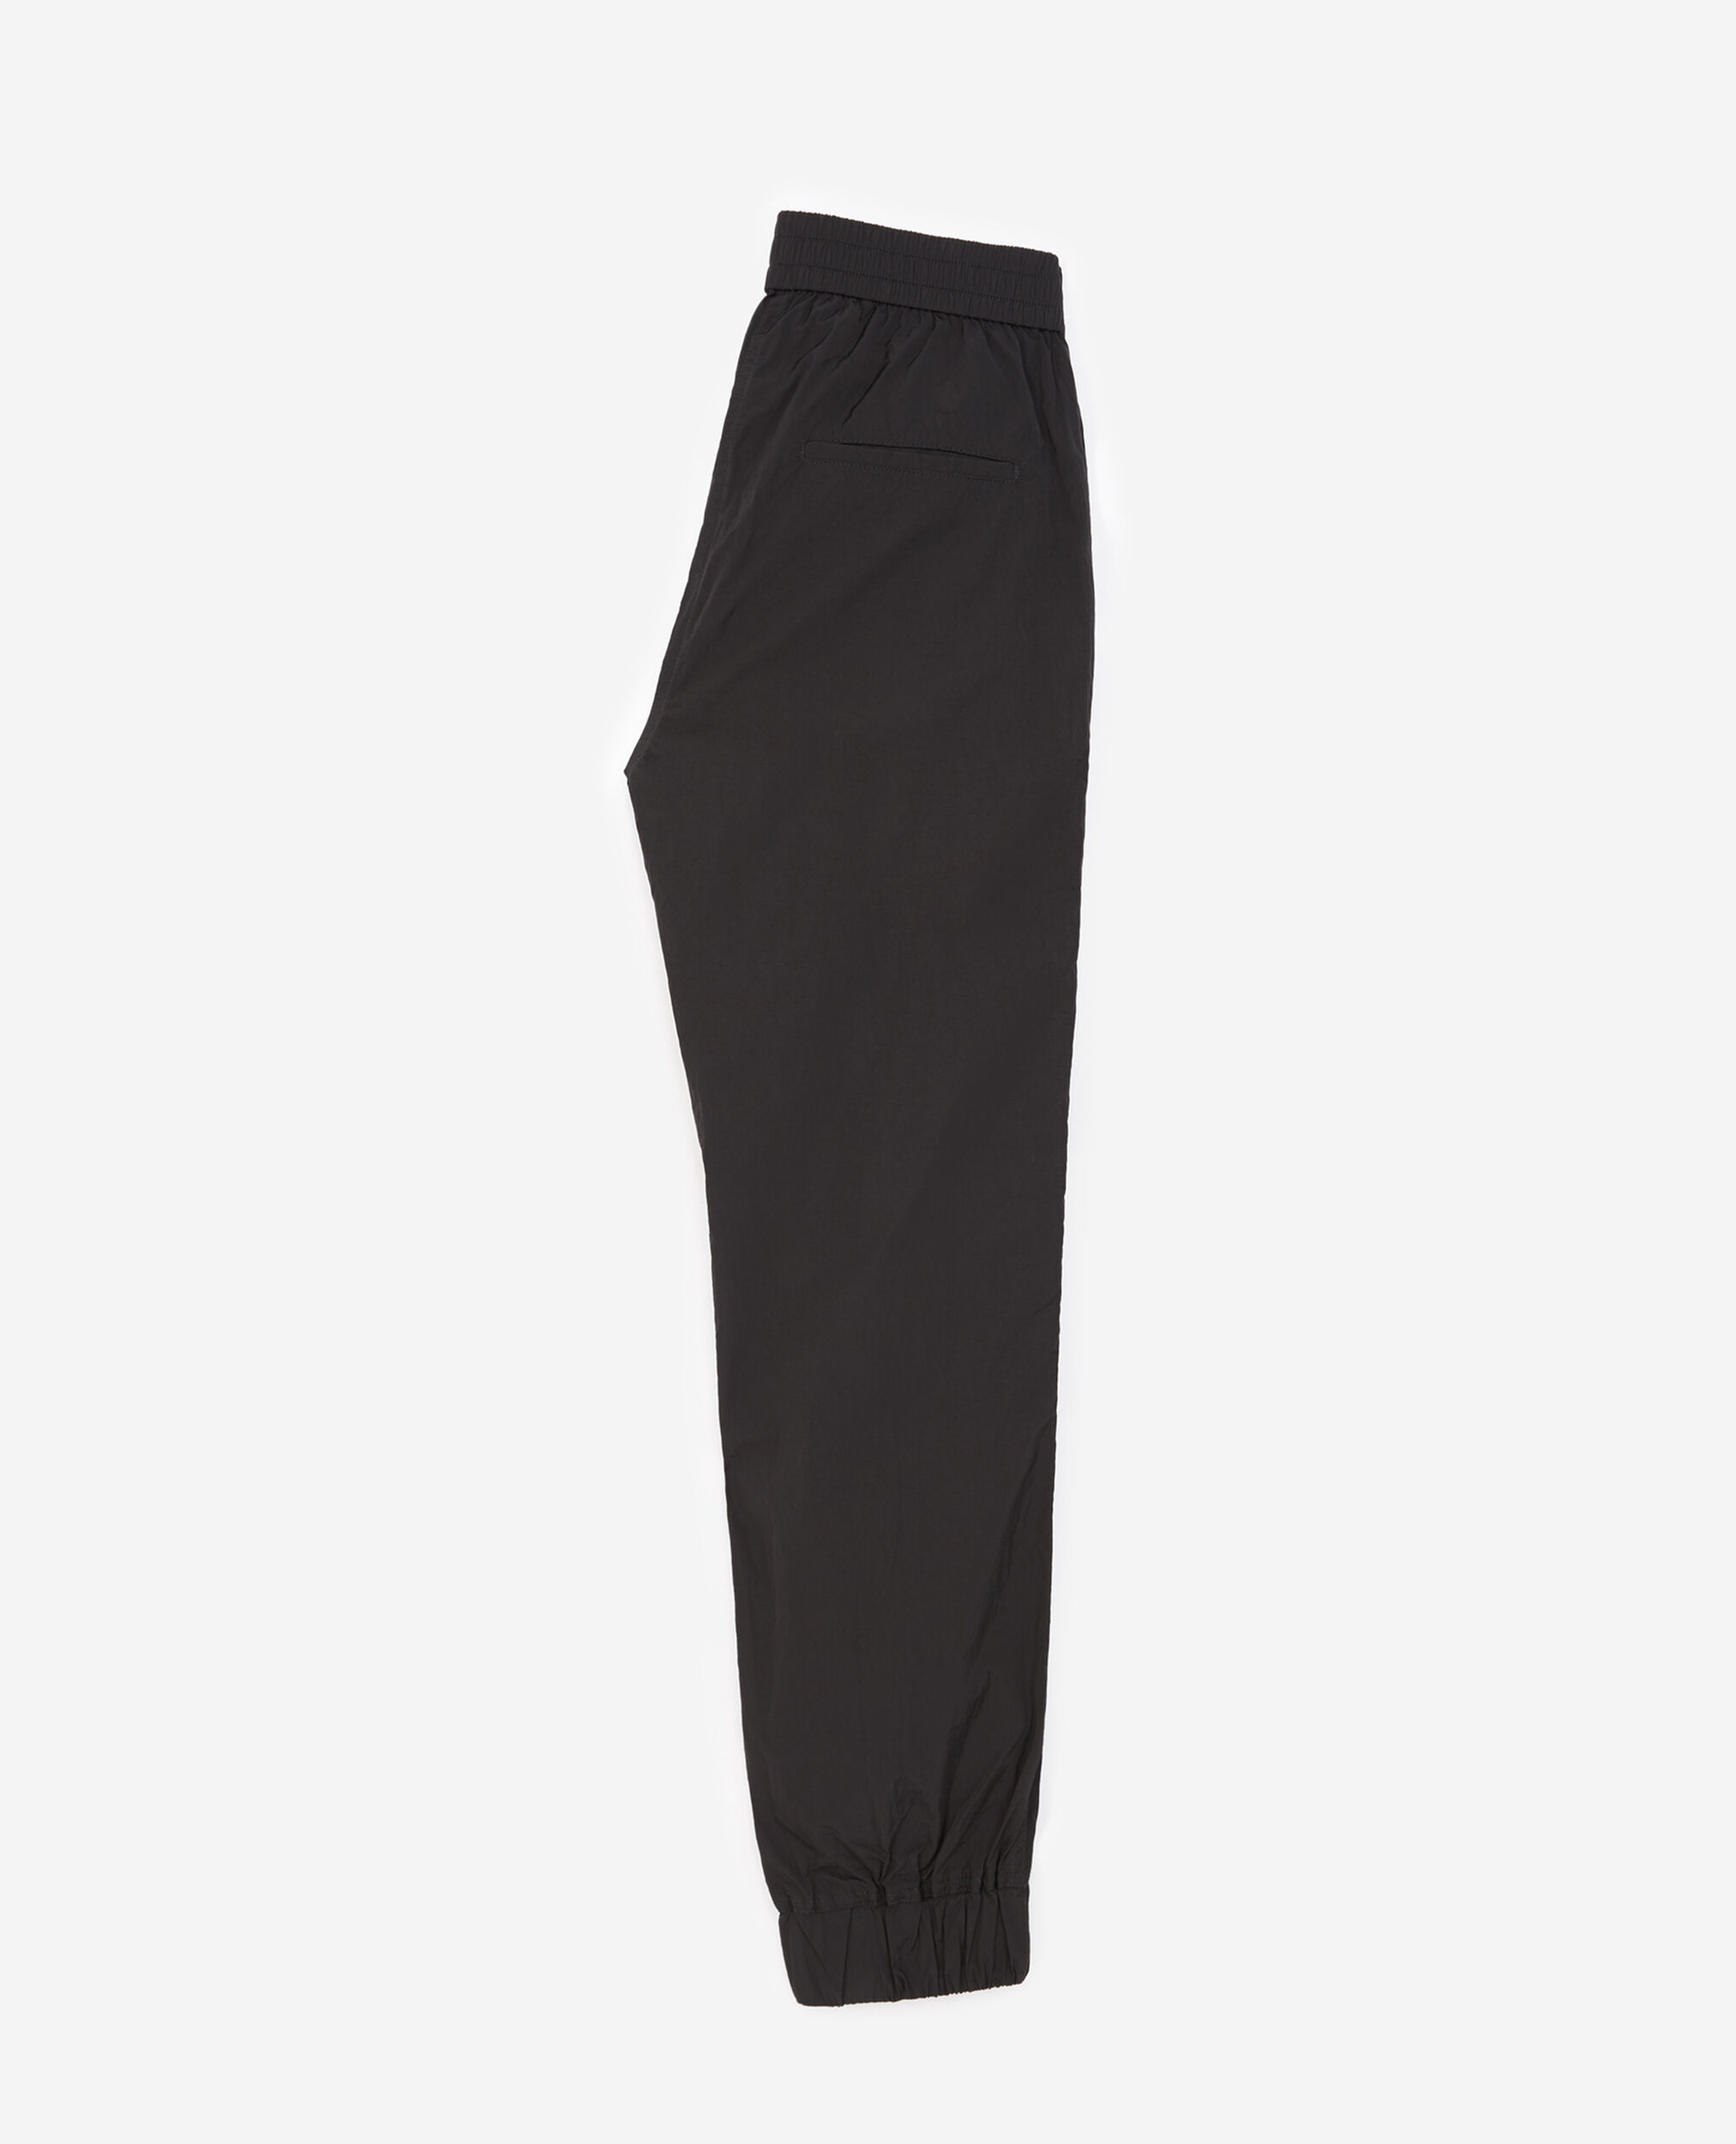 Black trousers w/logo trims down sides, BLACK, hi-res image number null